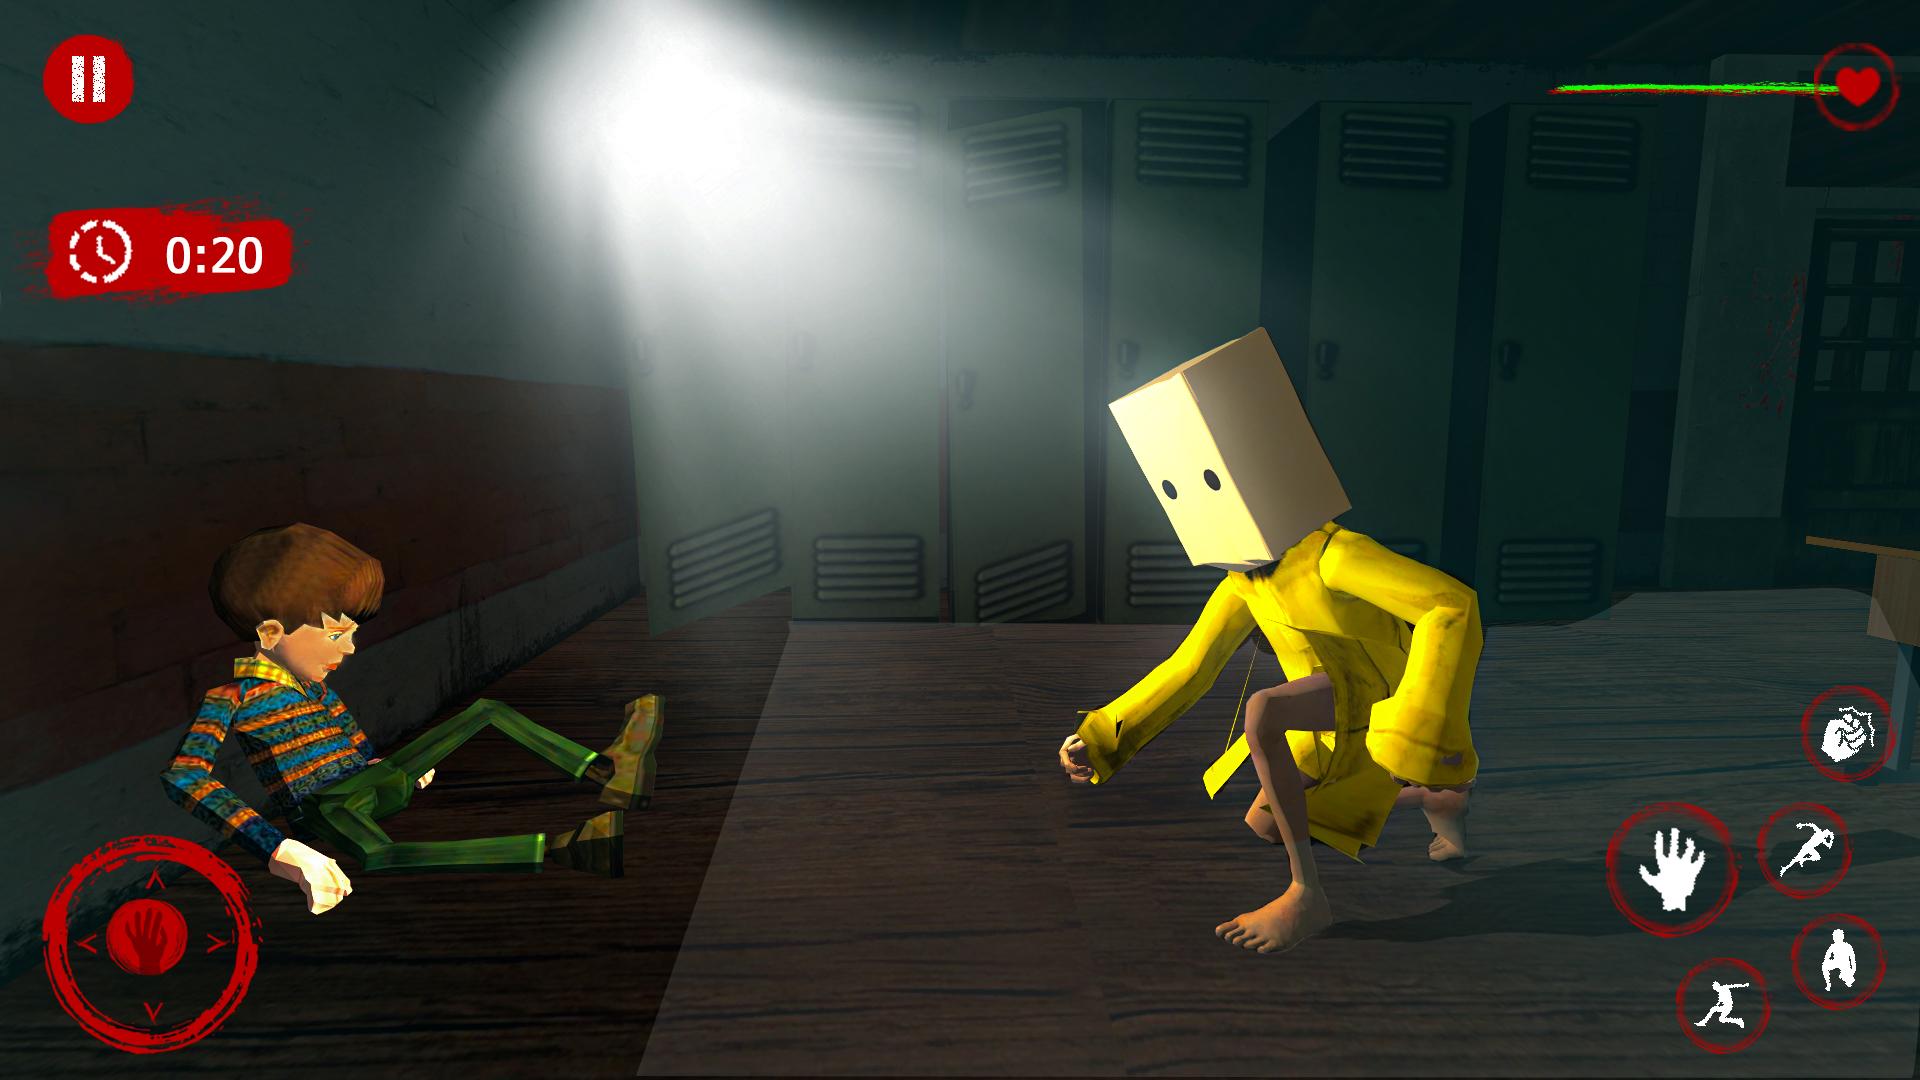 Little Scary Nightmares 2 - Haunted House Escape 0.1 Screenshot 5